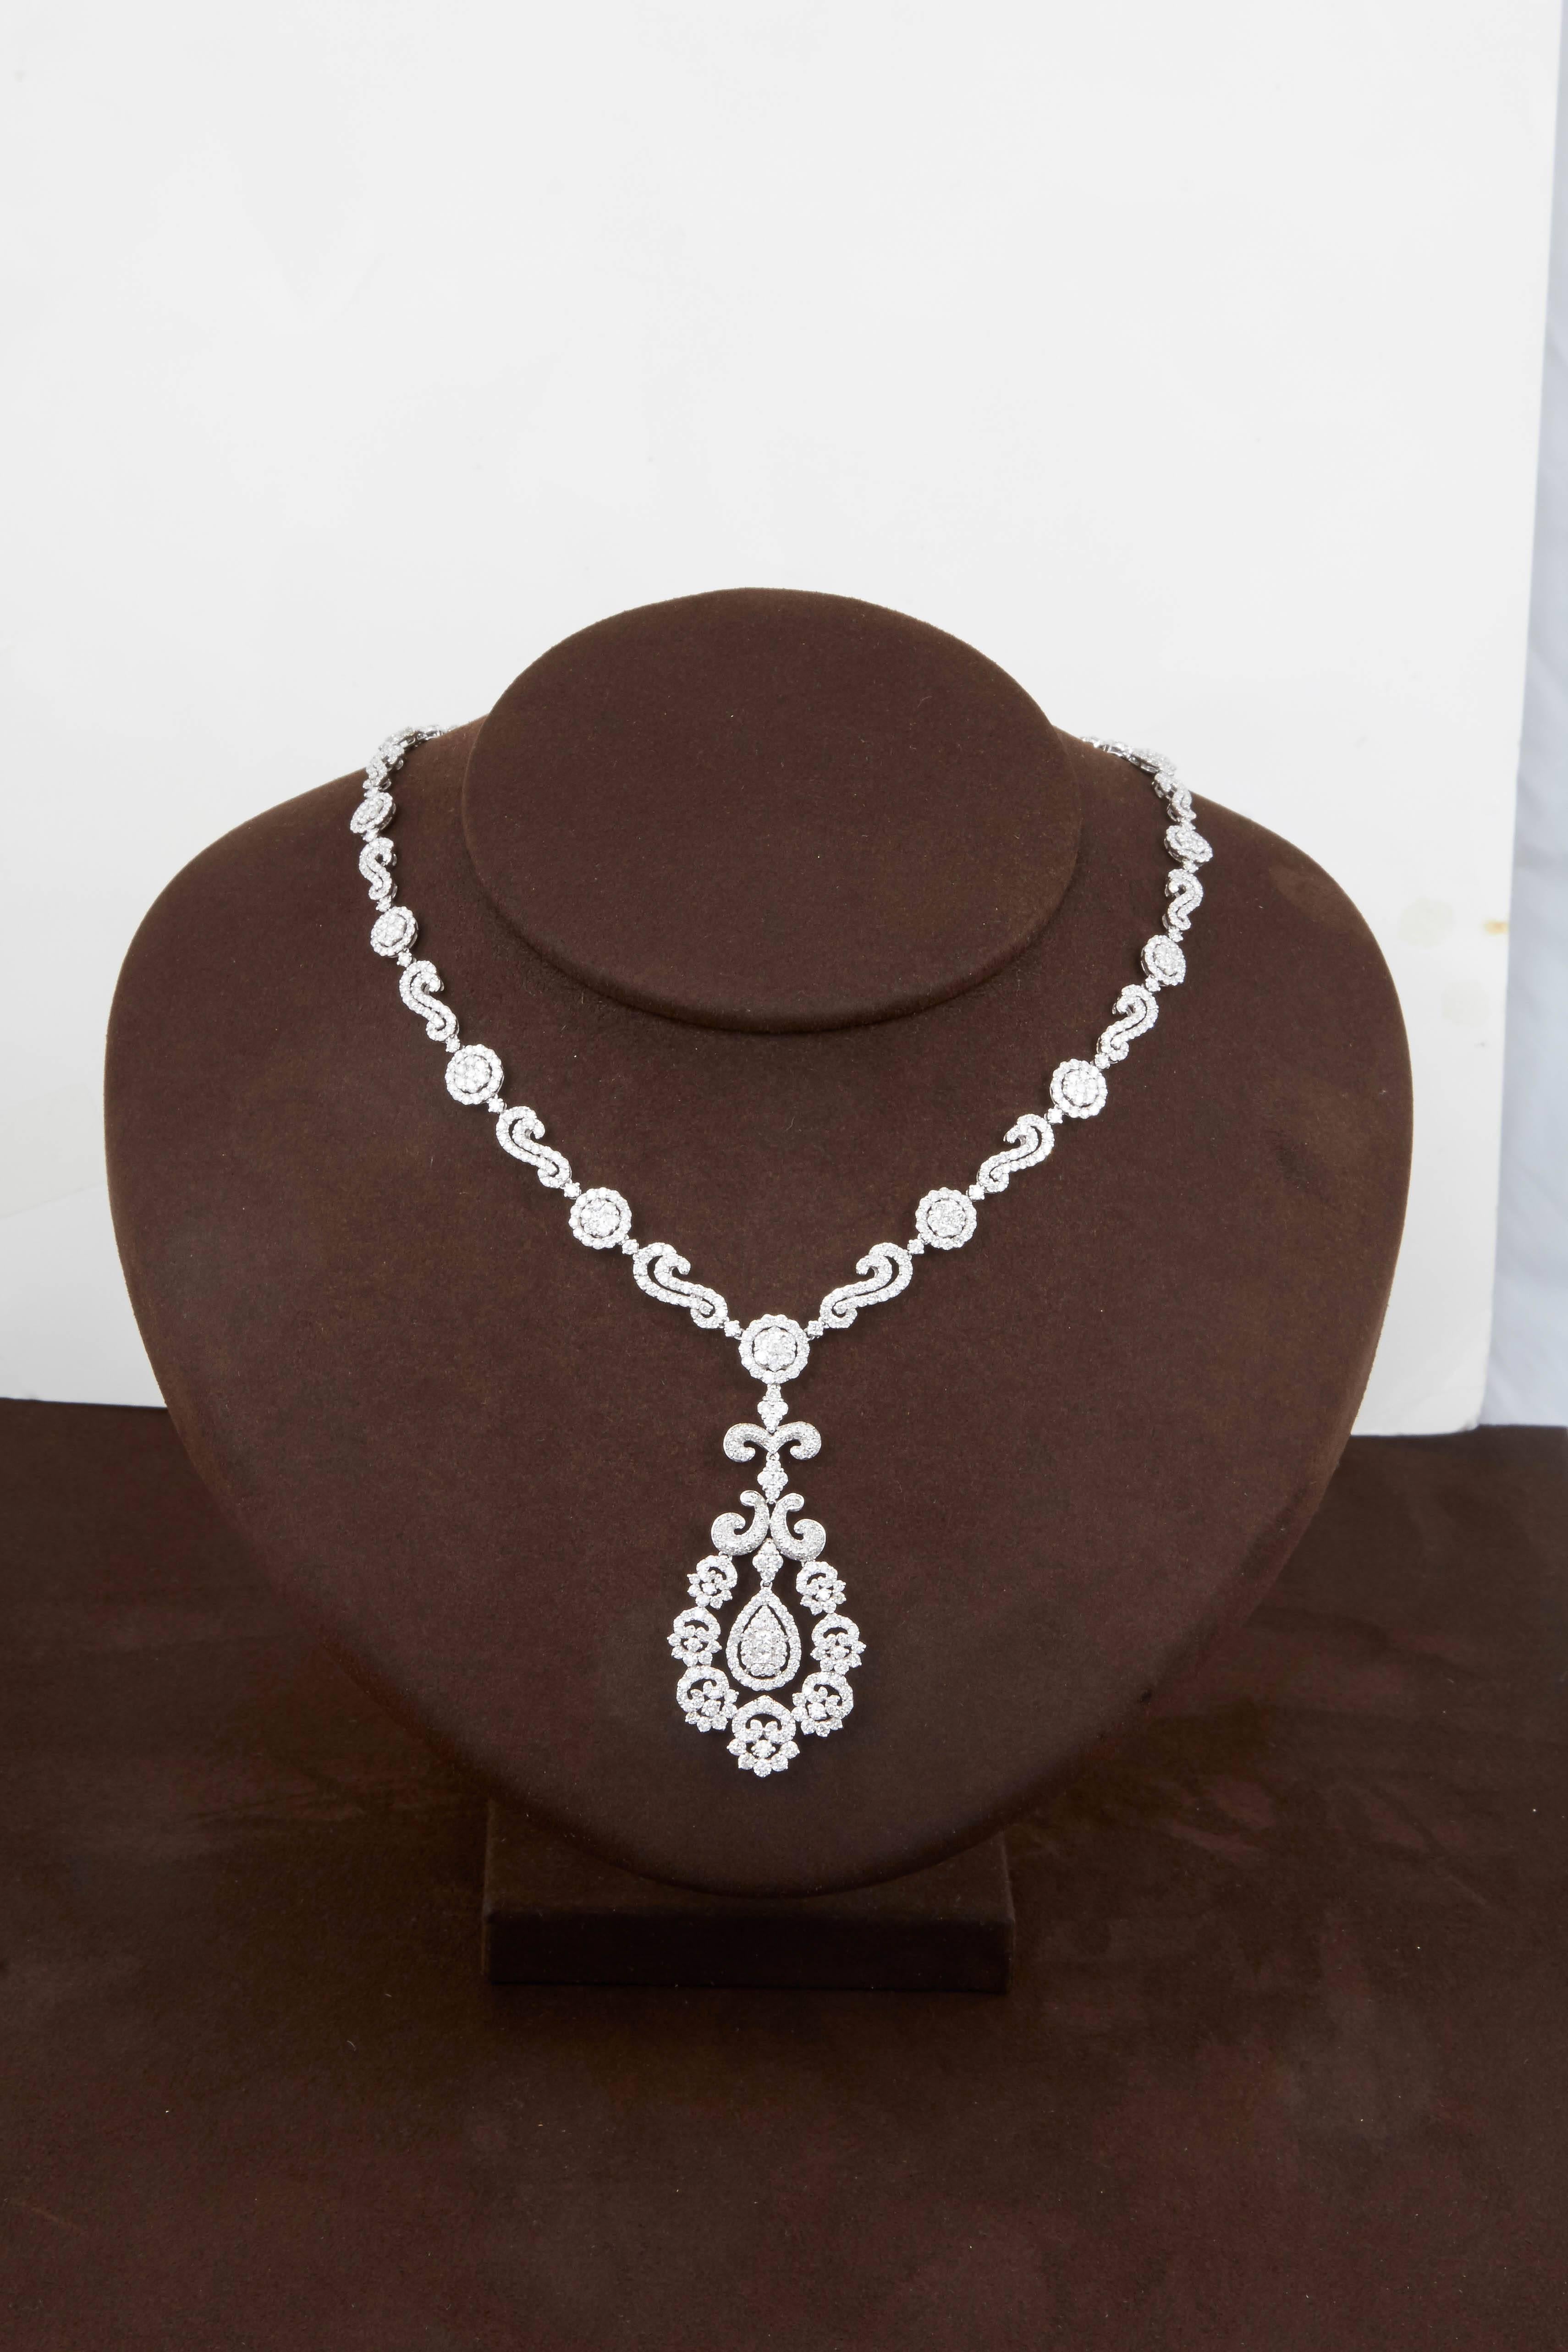 

Full of SPARKLE!

A gorgeous diamond necklace featuring 15.01 carats of F/G diamonds set in 18k white gold. 

Approximately 16.75 inch neck size but can be easily adjusted. 

The pendant drop measures approximately 2.16 inches.

